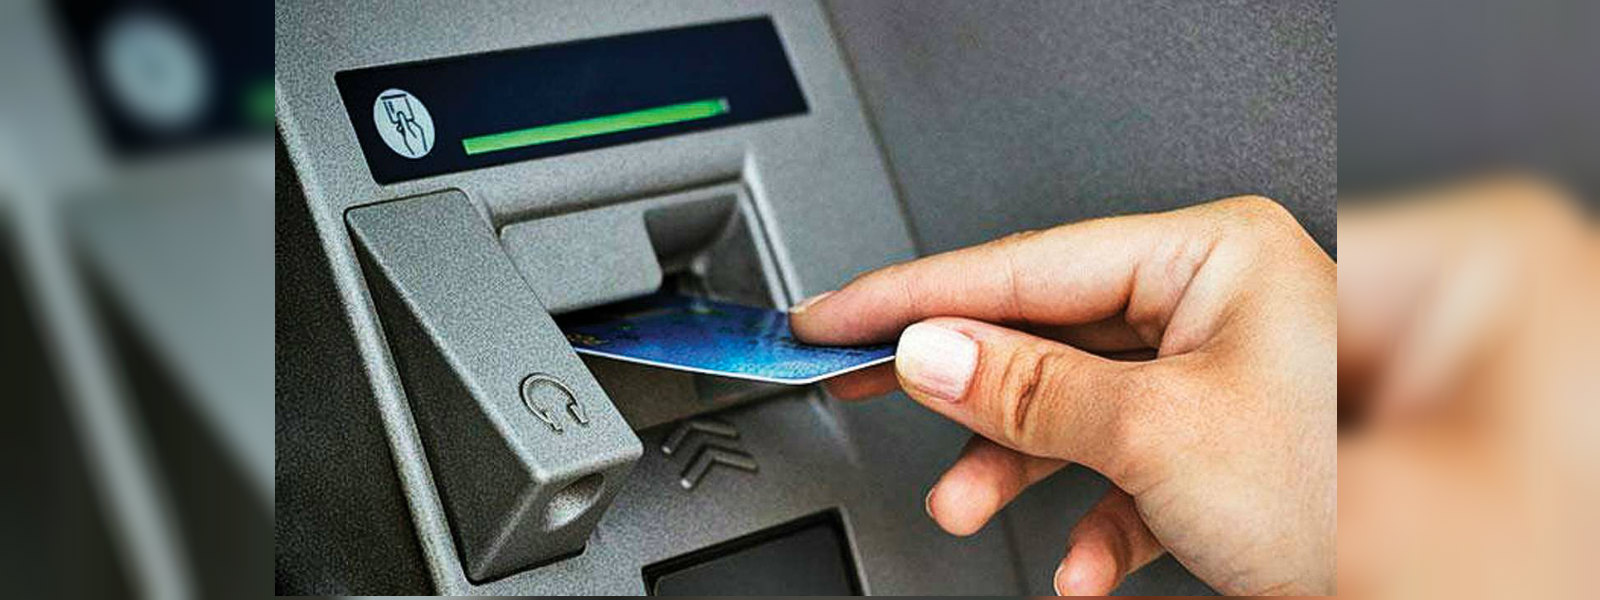 Three arrested in connection to ATM fraud